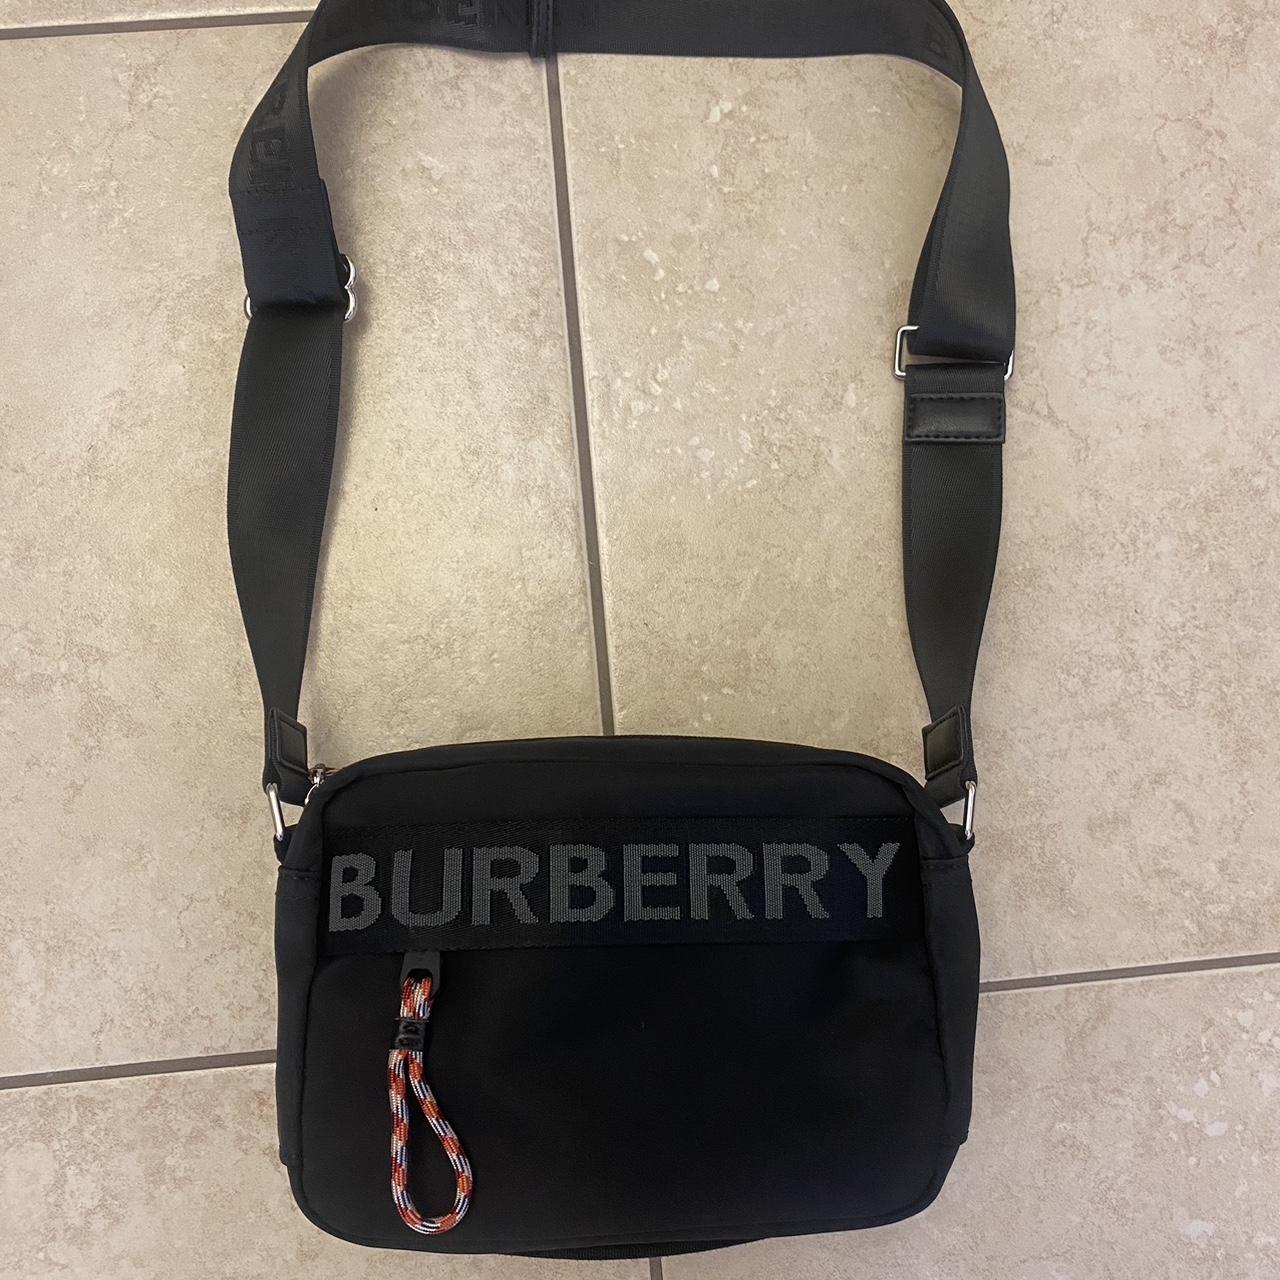 Authentic Burberry bag. Like new except for black mark n one side shown in  pics. | Burberry bag, Bags, Burberry